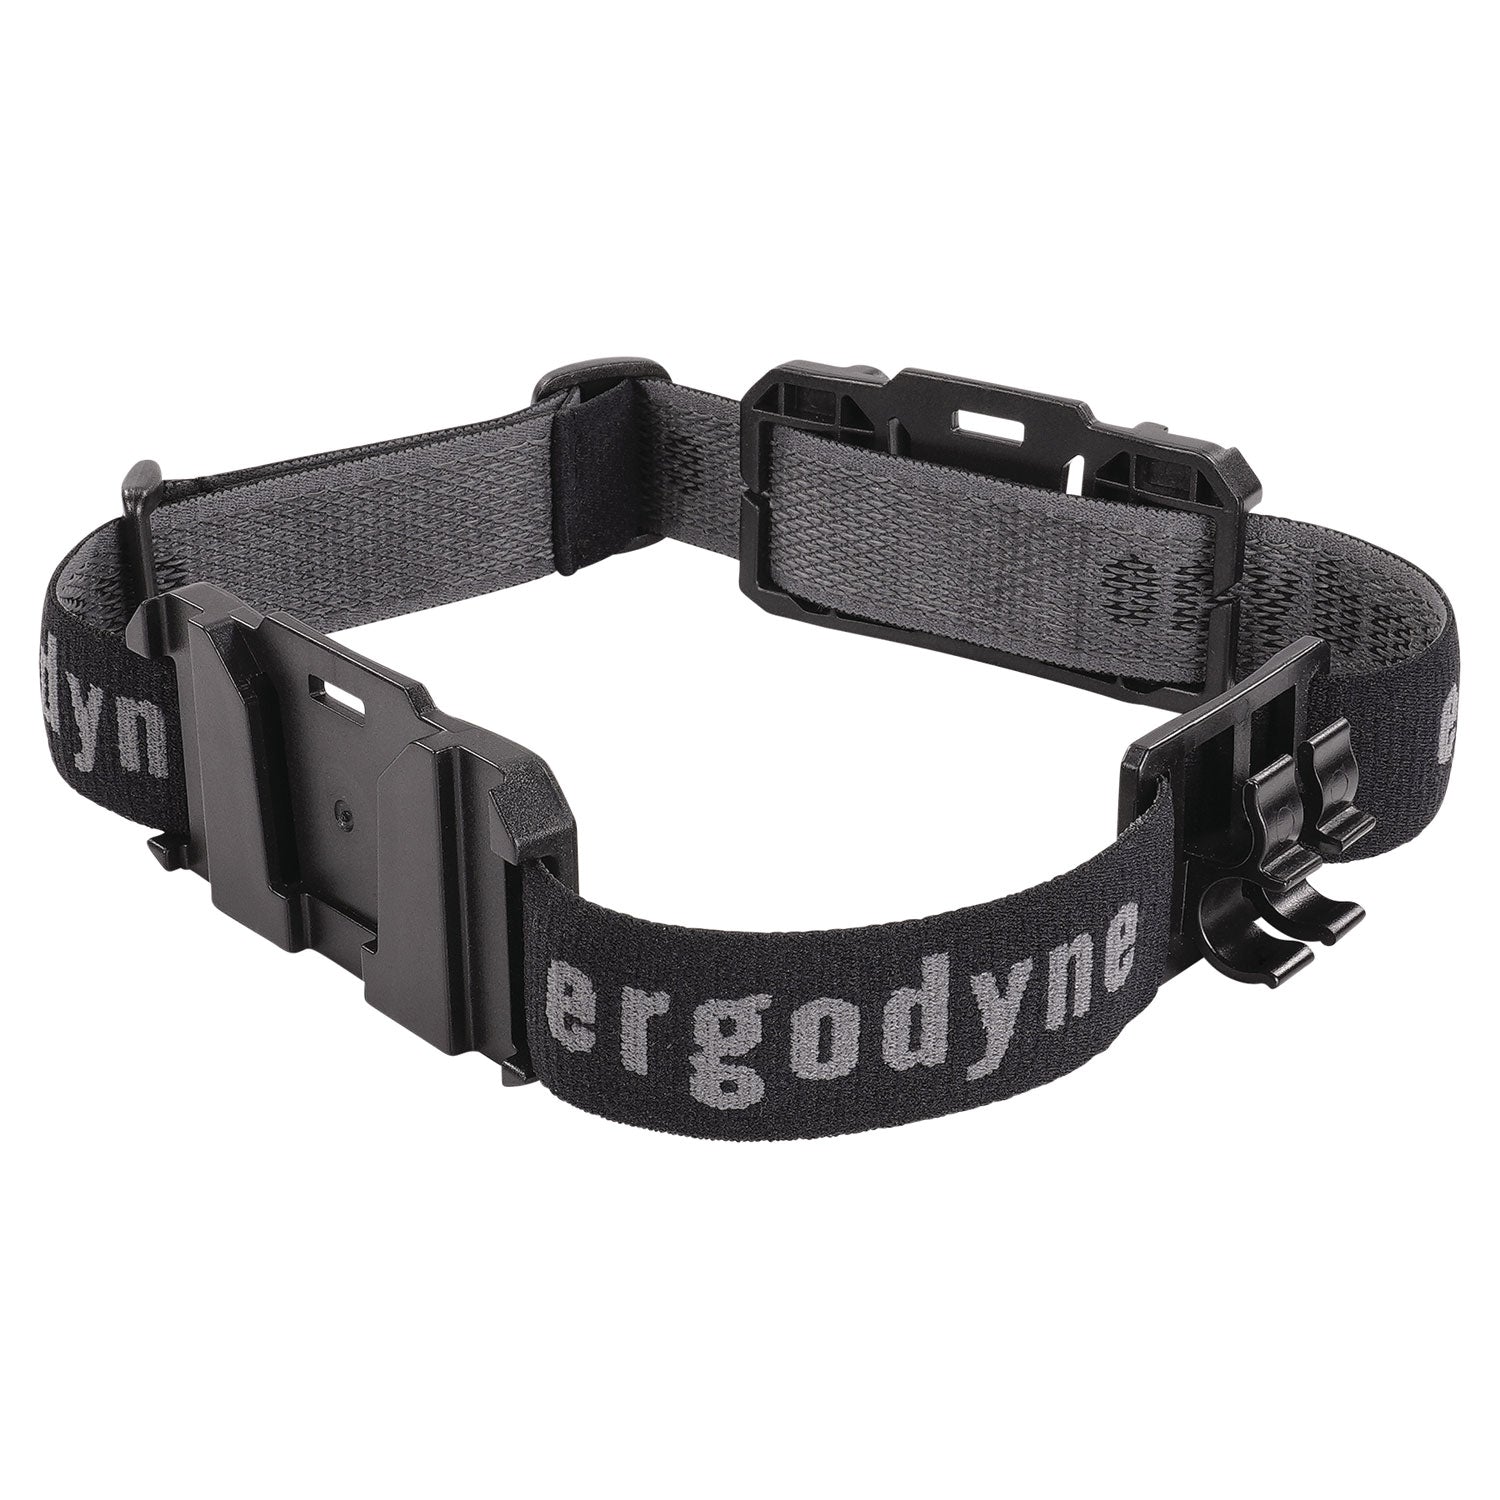 skullerz-8980-headband-light-mount-with-fabric-strap-ships-in-1-3-business-days_ego60292 - 1